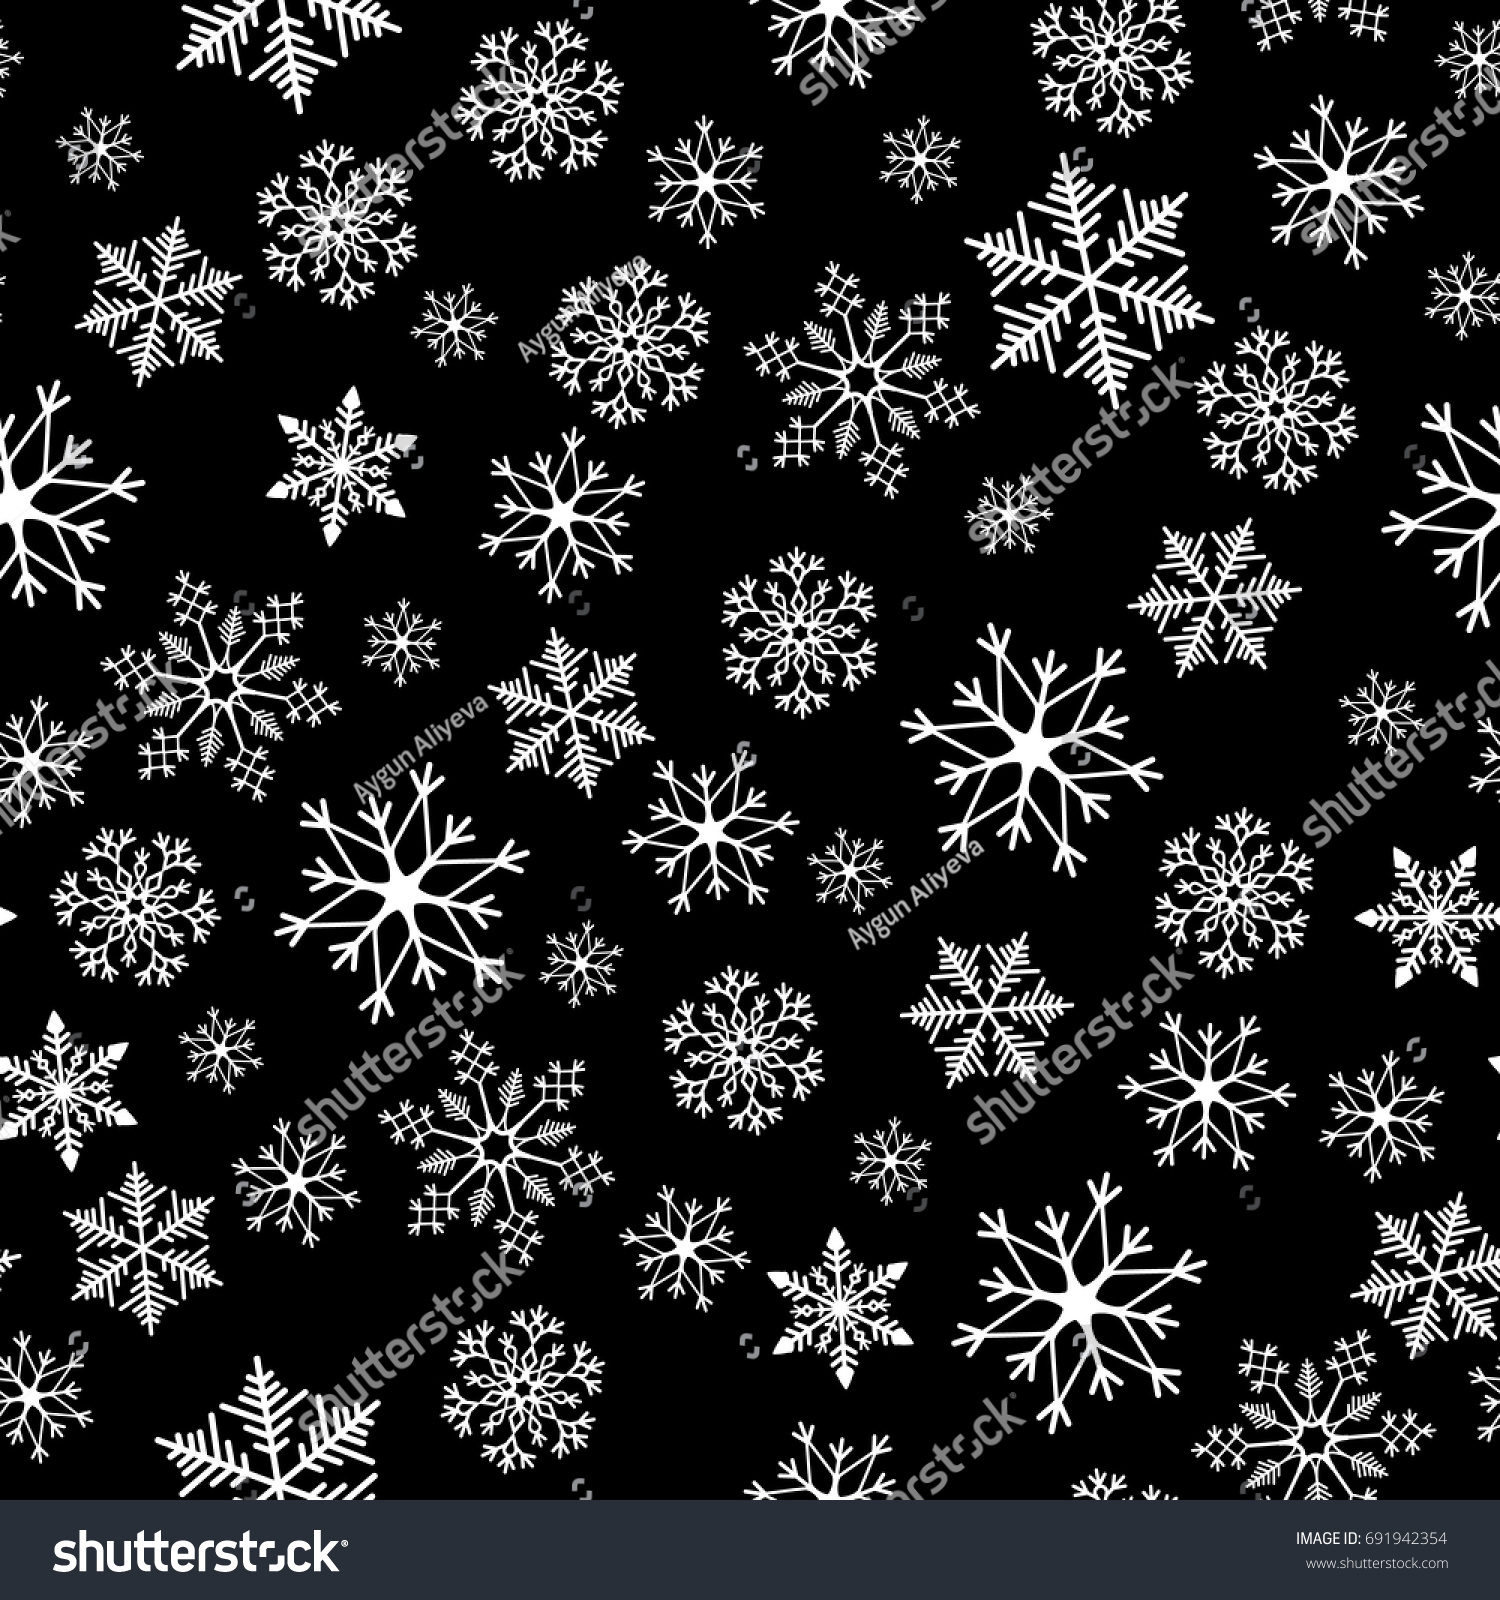 Snowflake simple seamless pattern Abstract wallpaper wrapping decoration Symbol of winter Merry